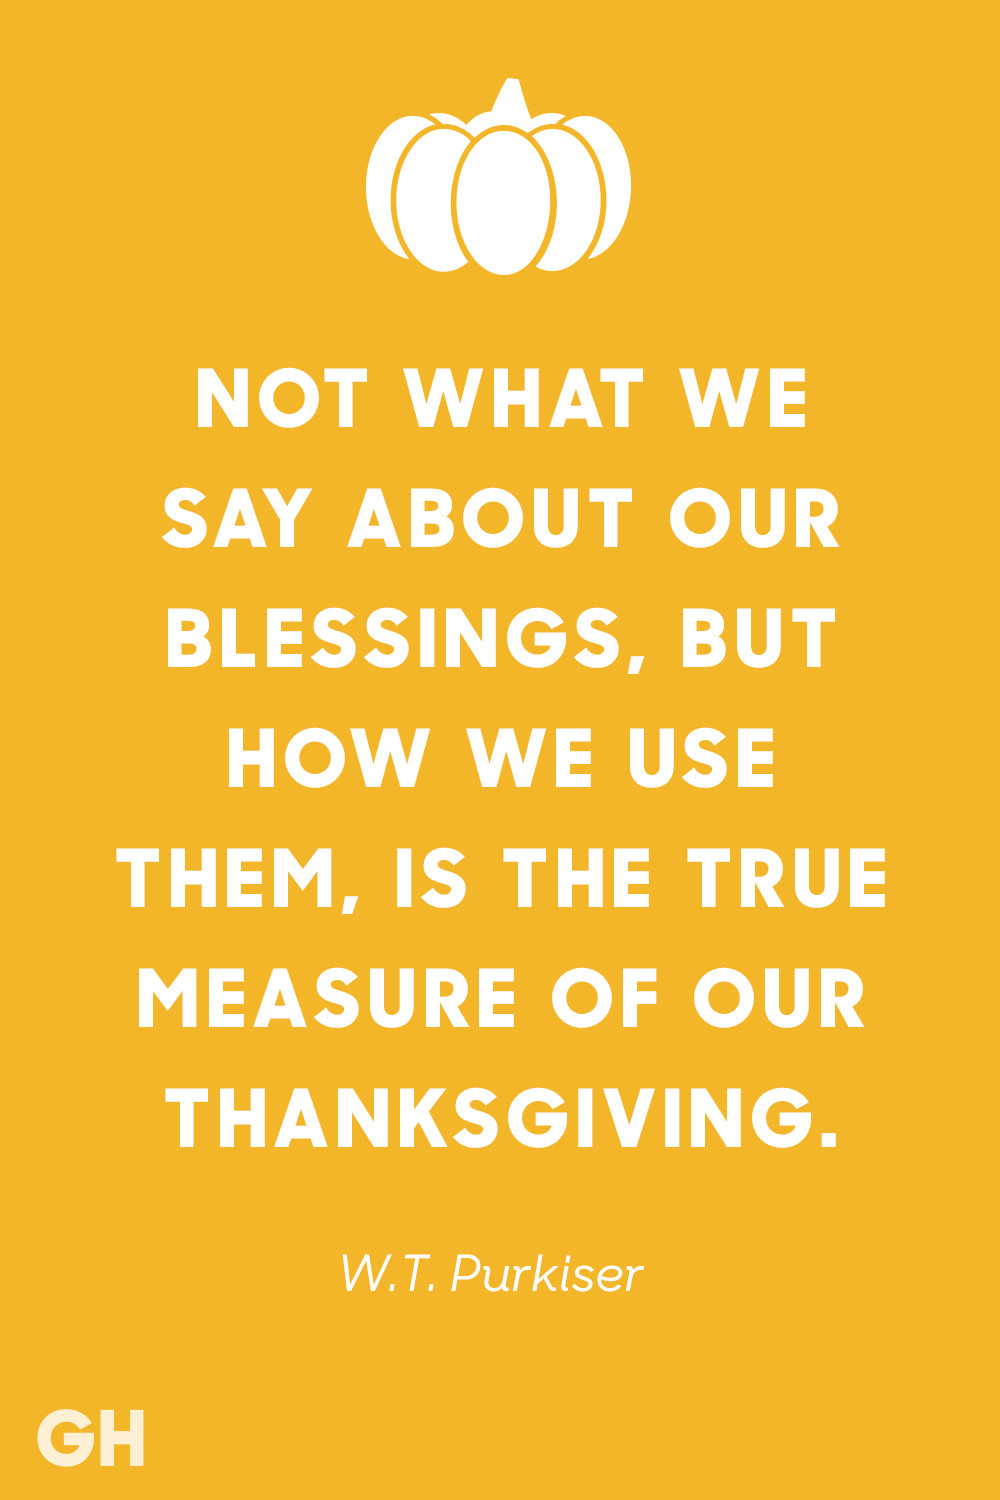 Thanksgiving Pics And Quotes
 15 Best Thanksgiving Quotes Inspirational and Funny